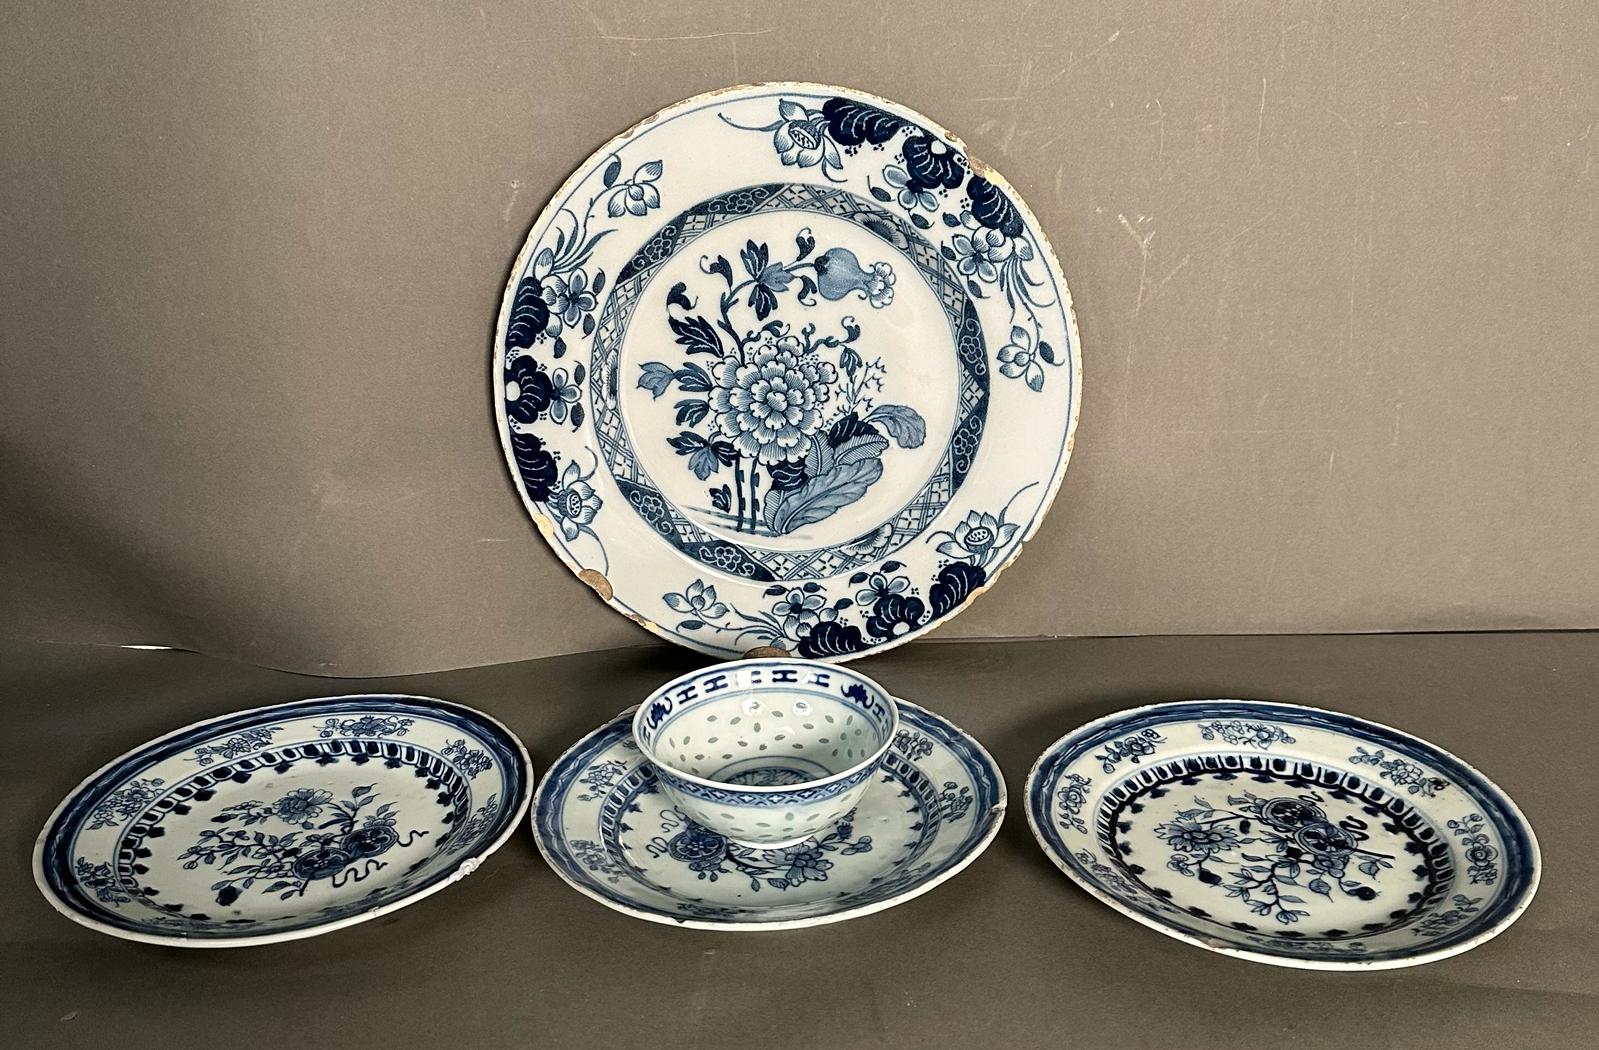 A selection of Chinese blue and white ceramic to include a plate, side plates and a small bowl - Image 7 of 12